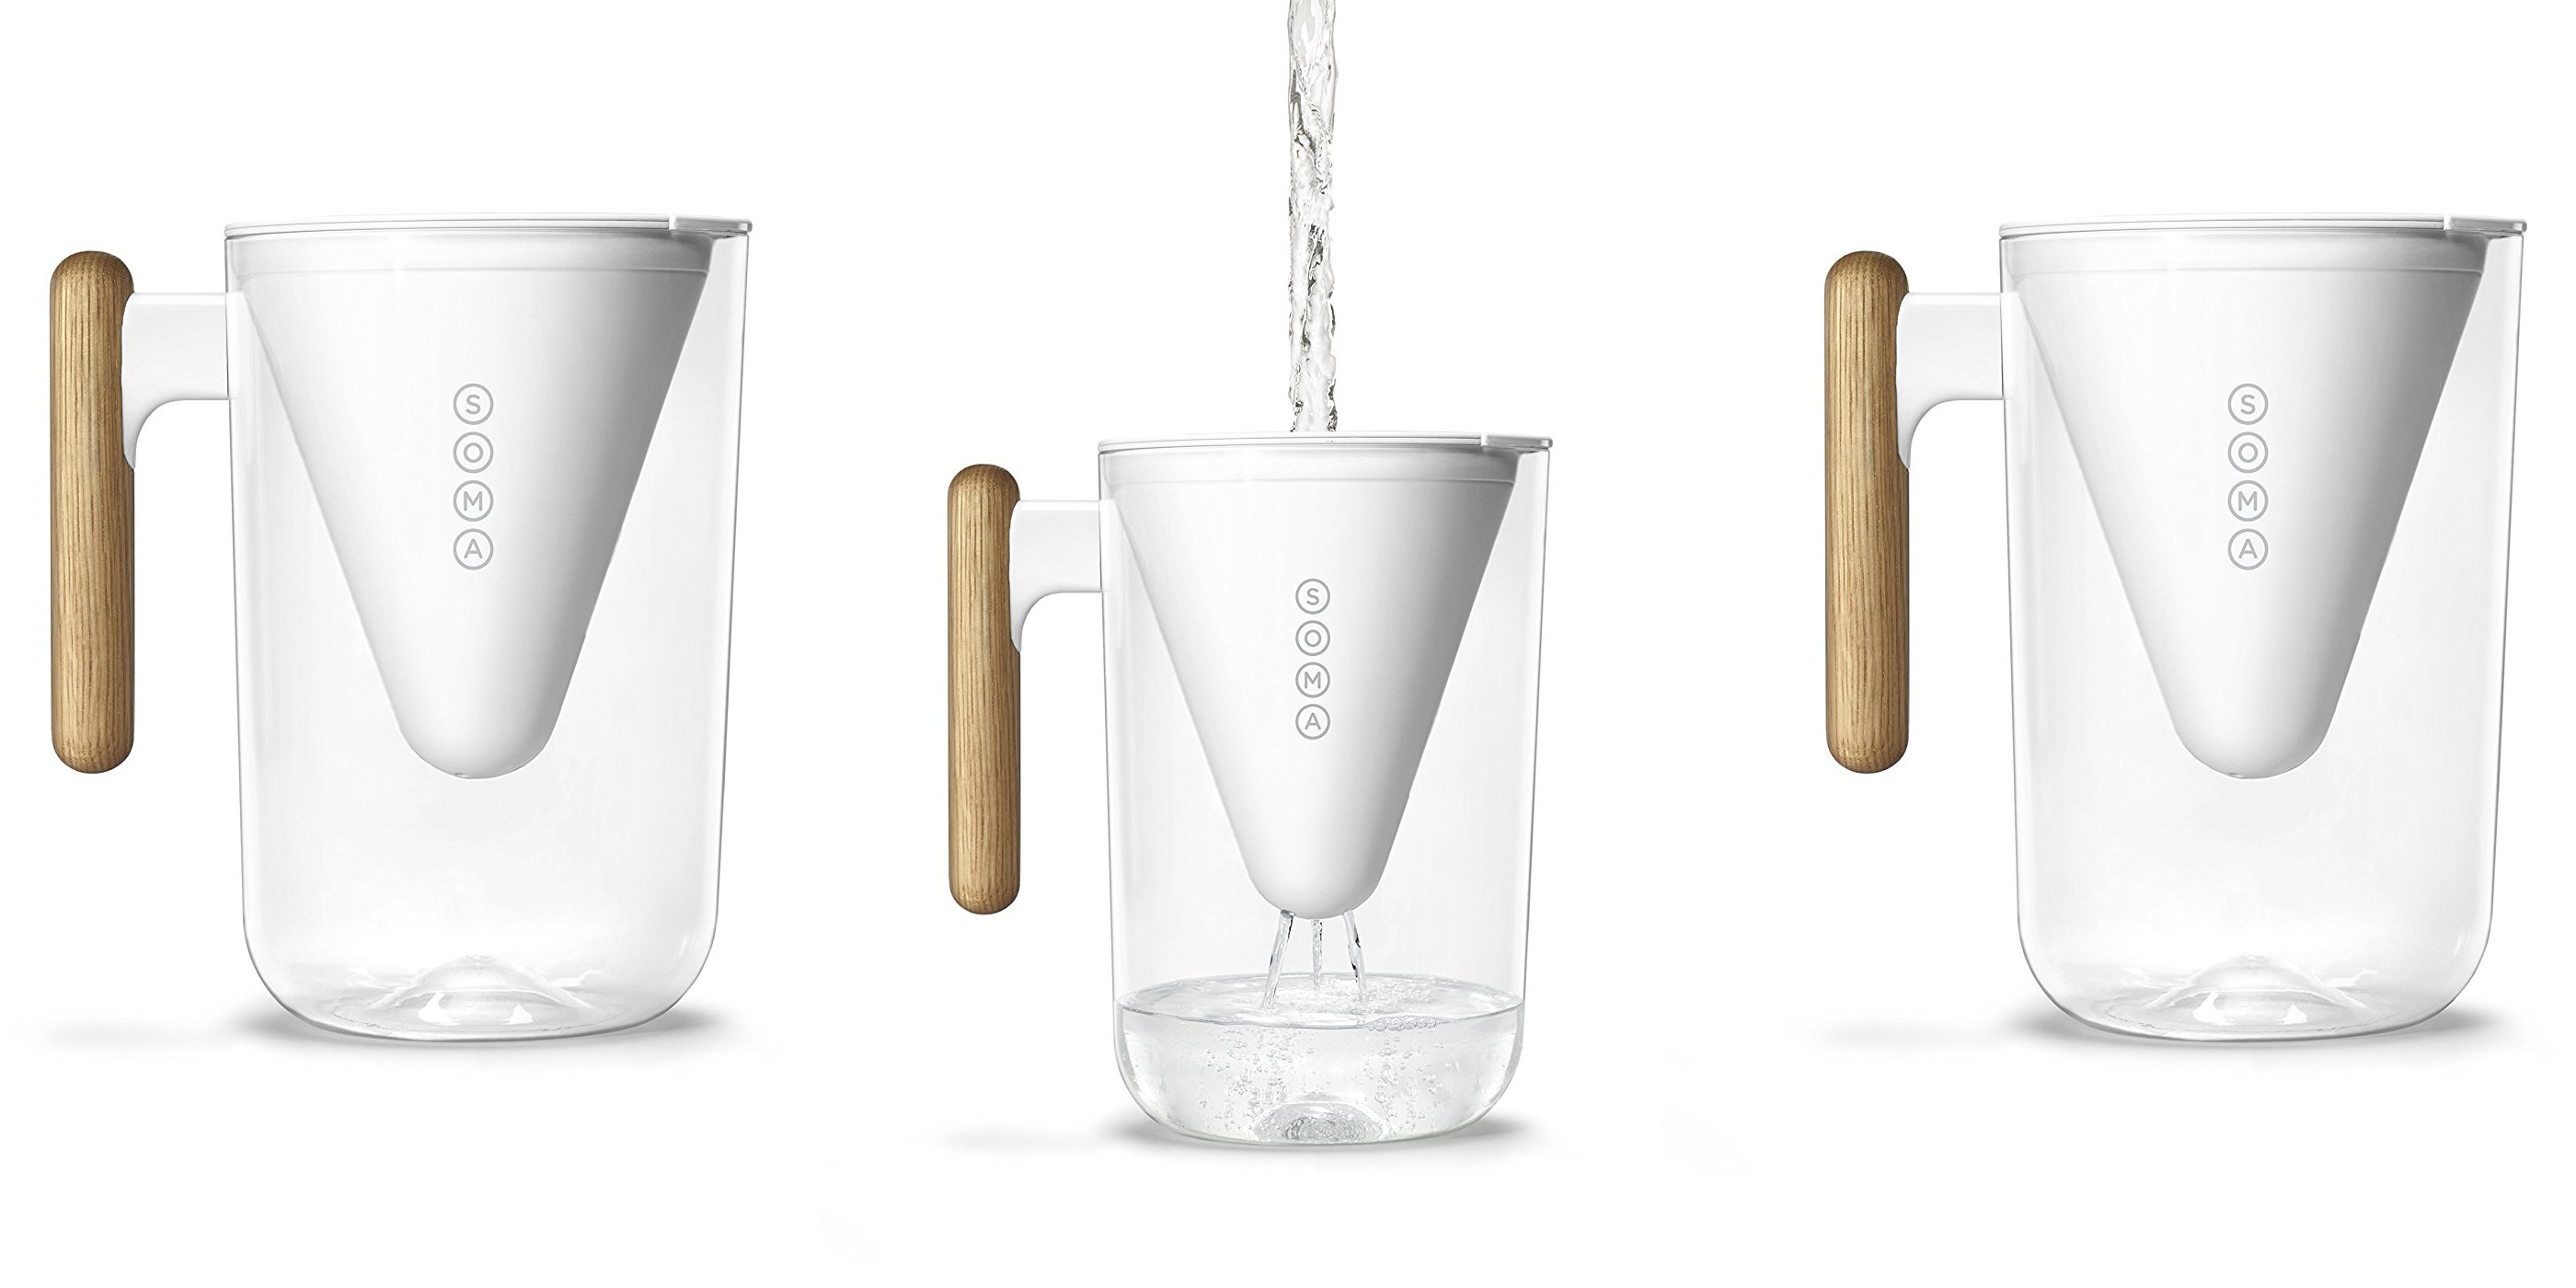 soma-water-filter-pitcher-01